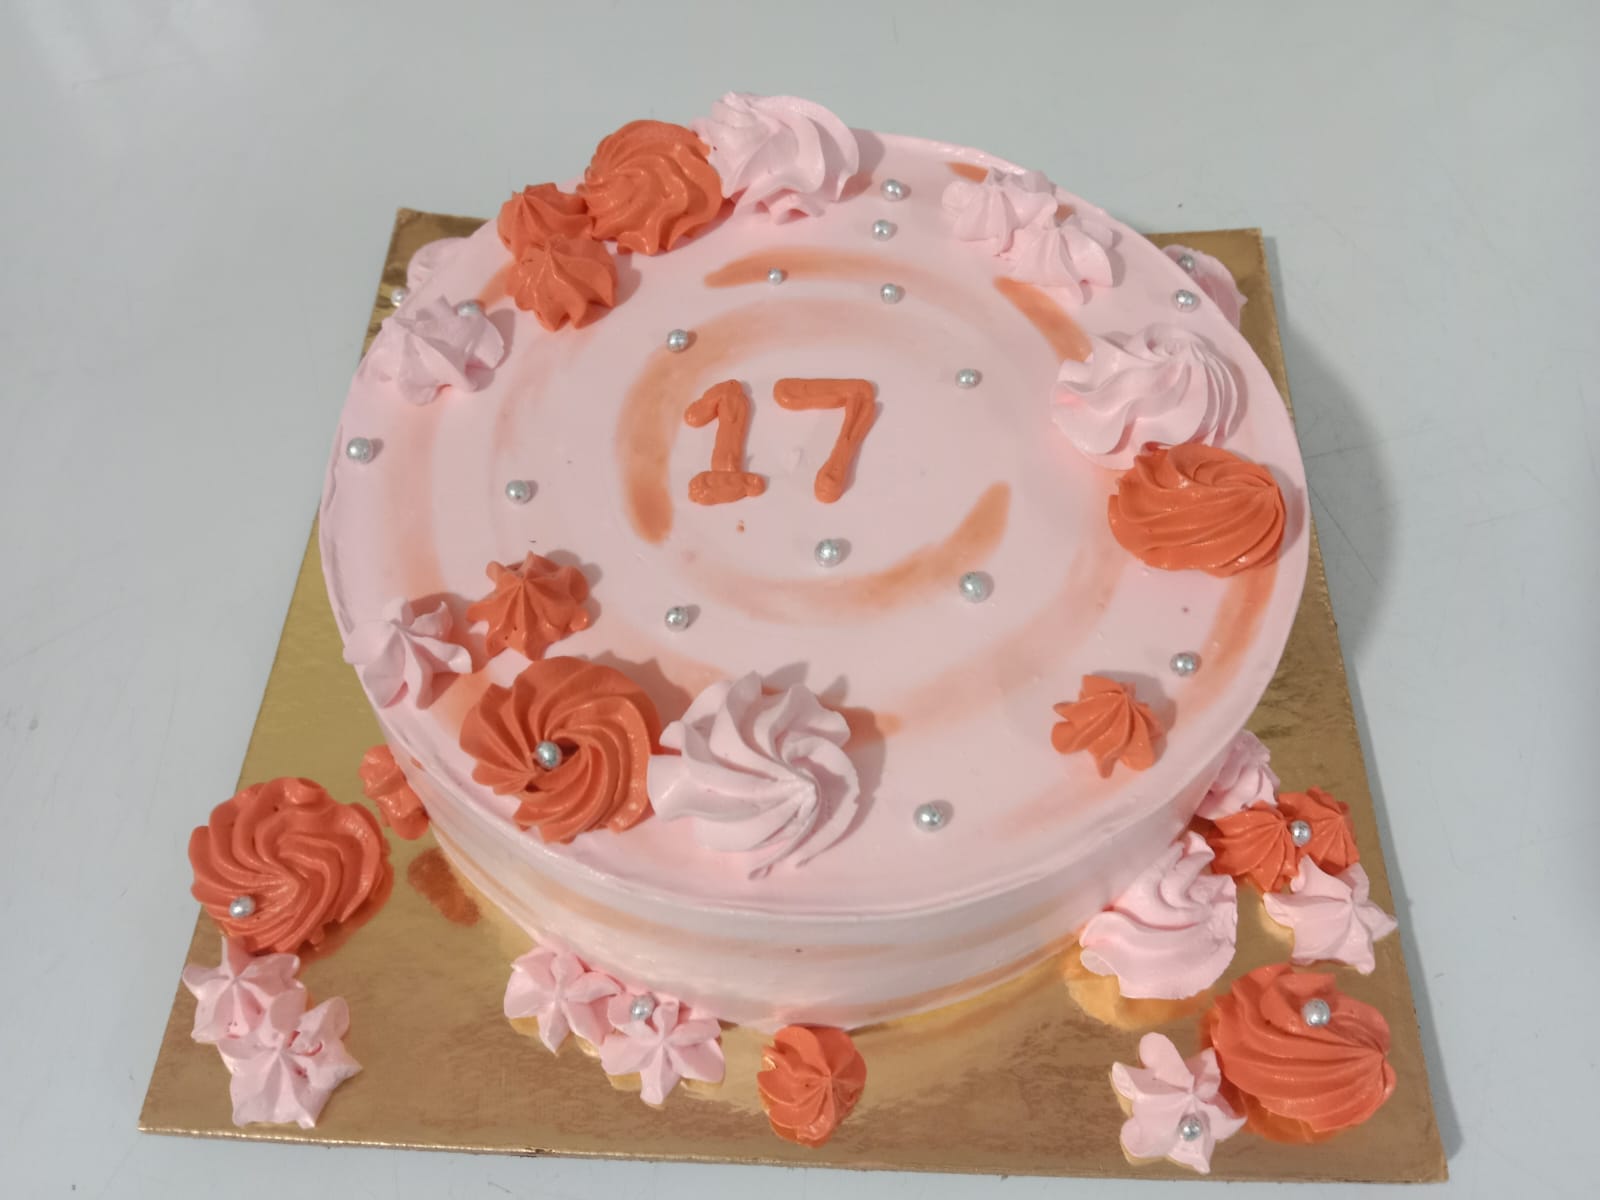 cakes for girls 17th birthday